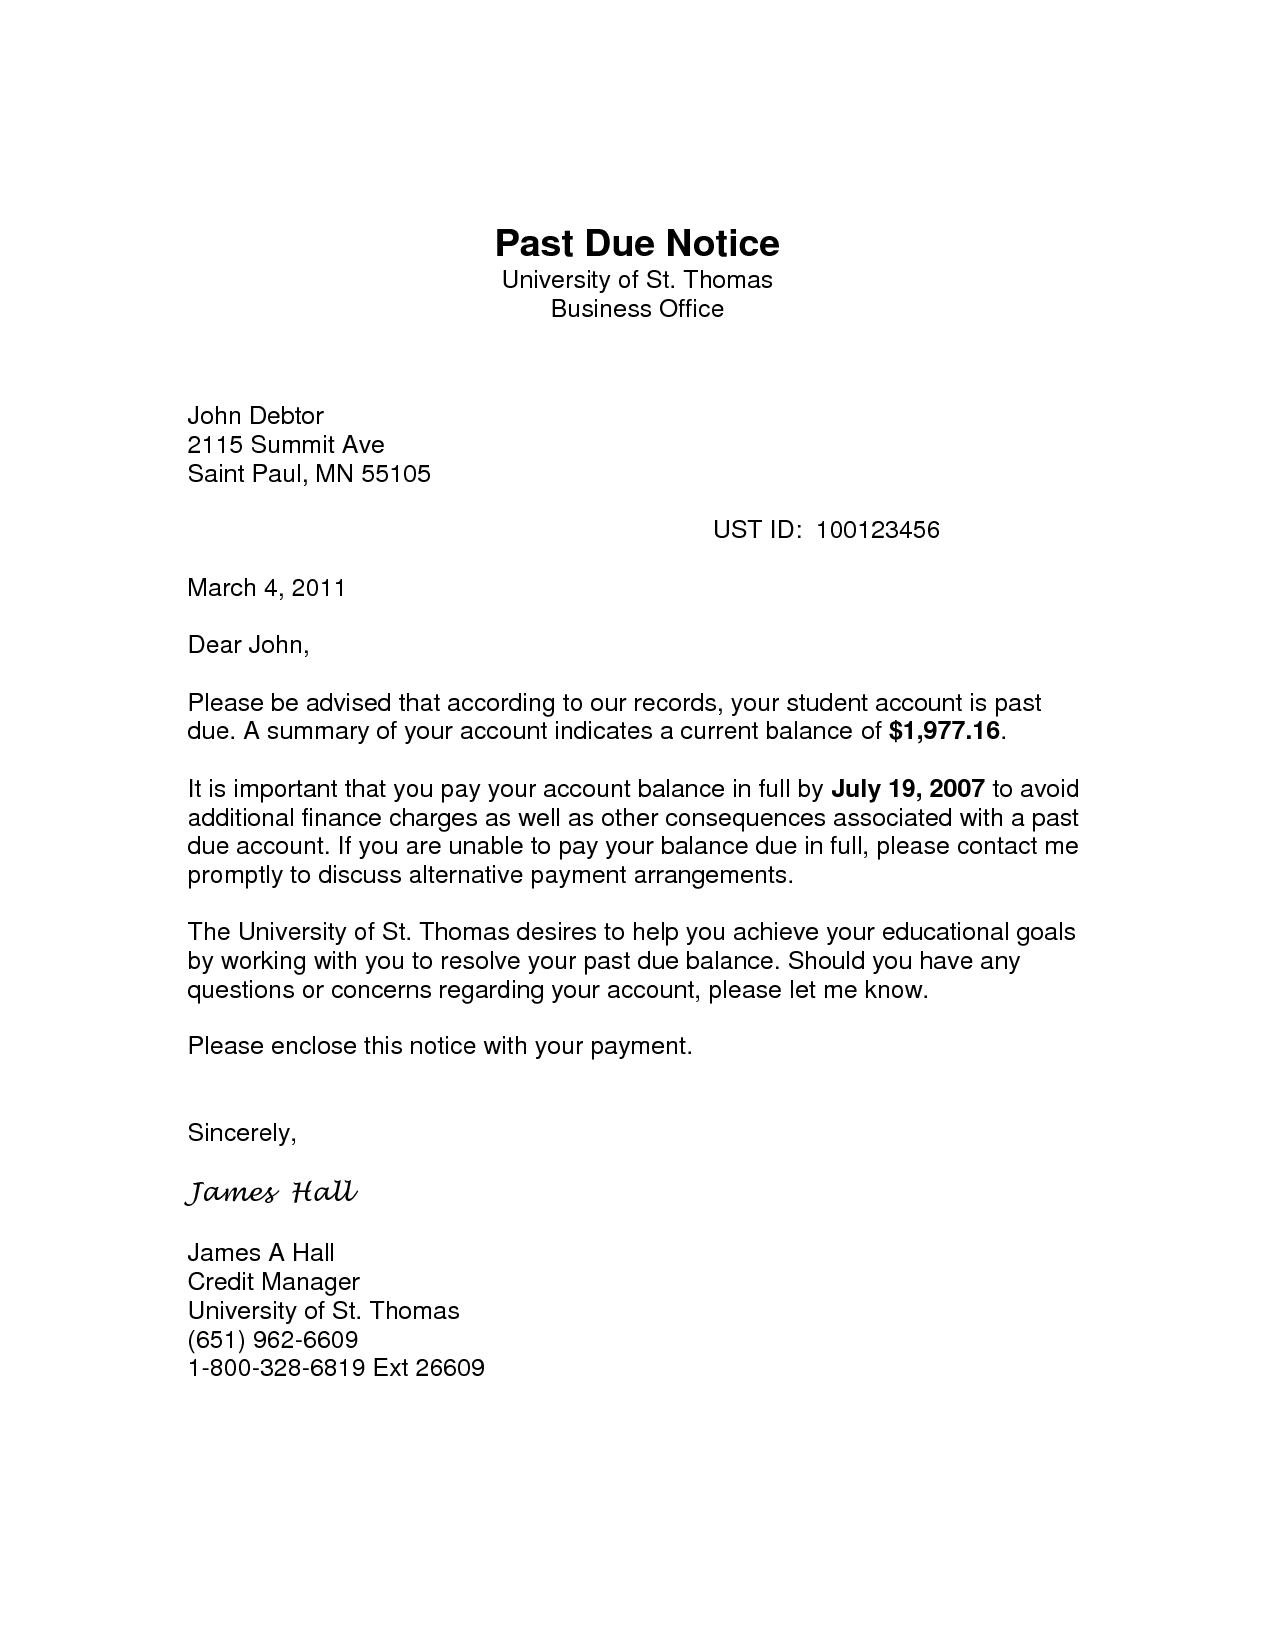 Past Due Rent Letter Template - Past Due Notice Acurnamedia